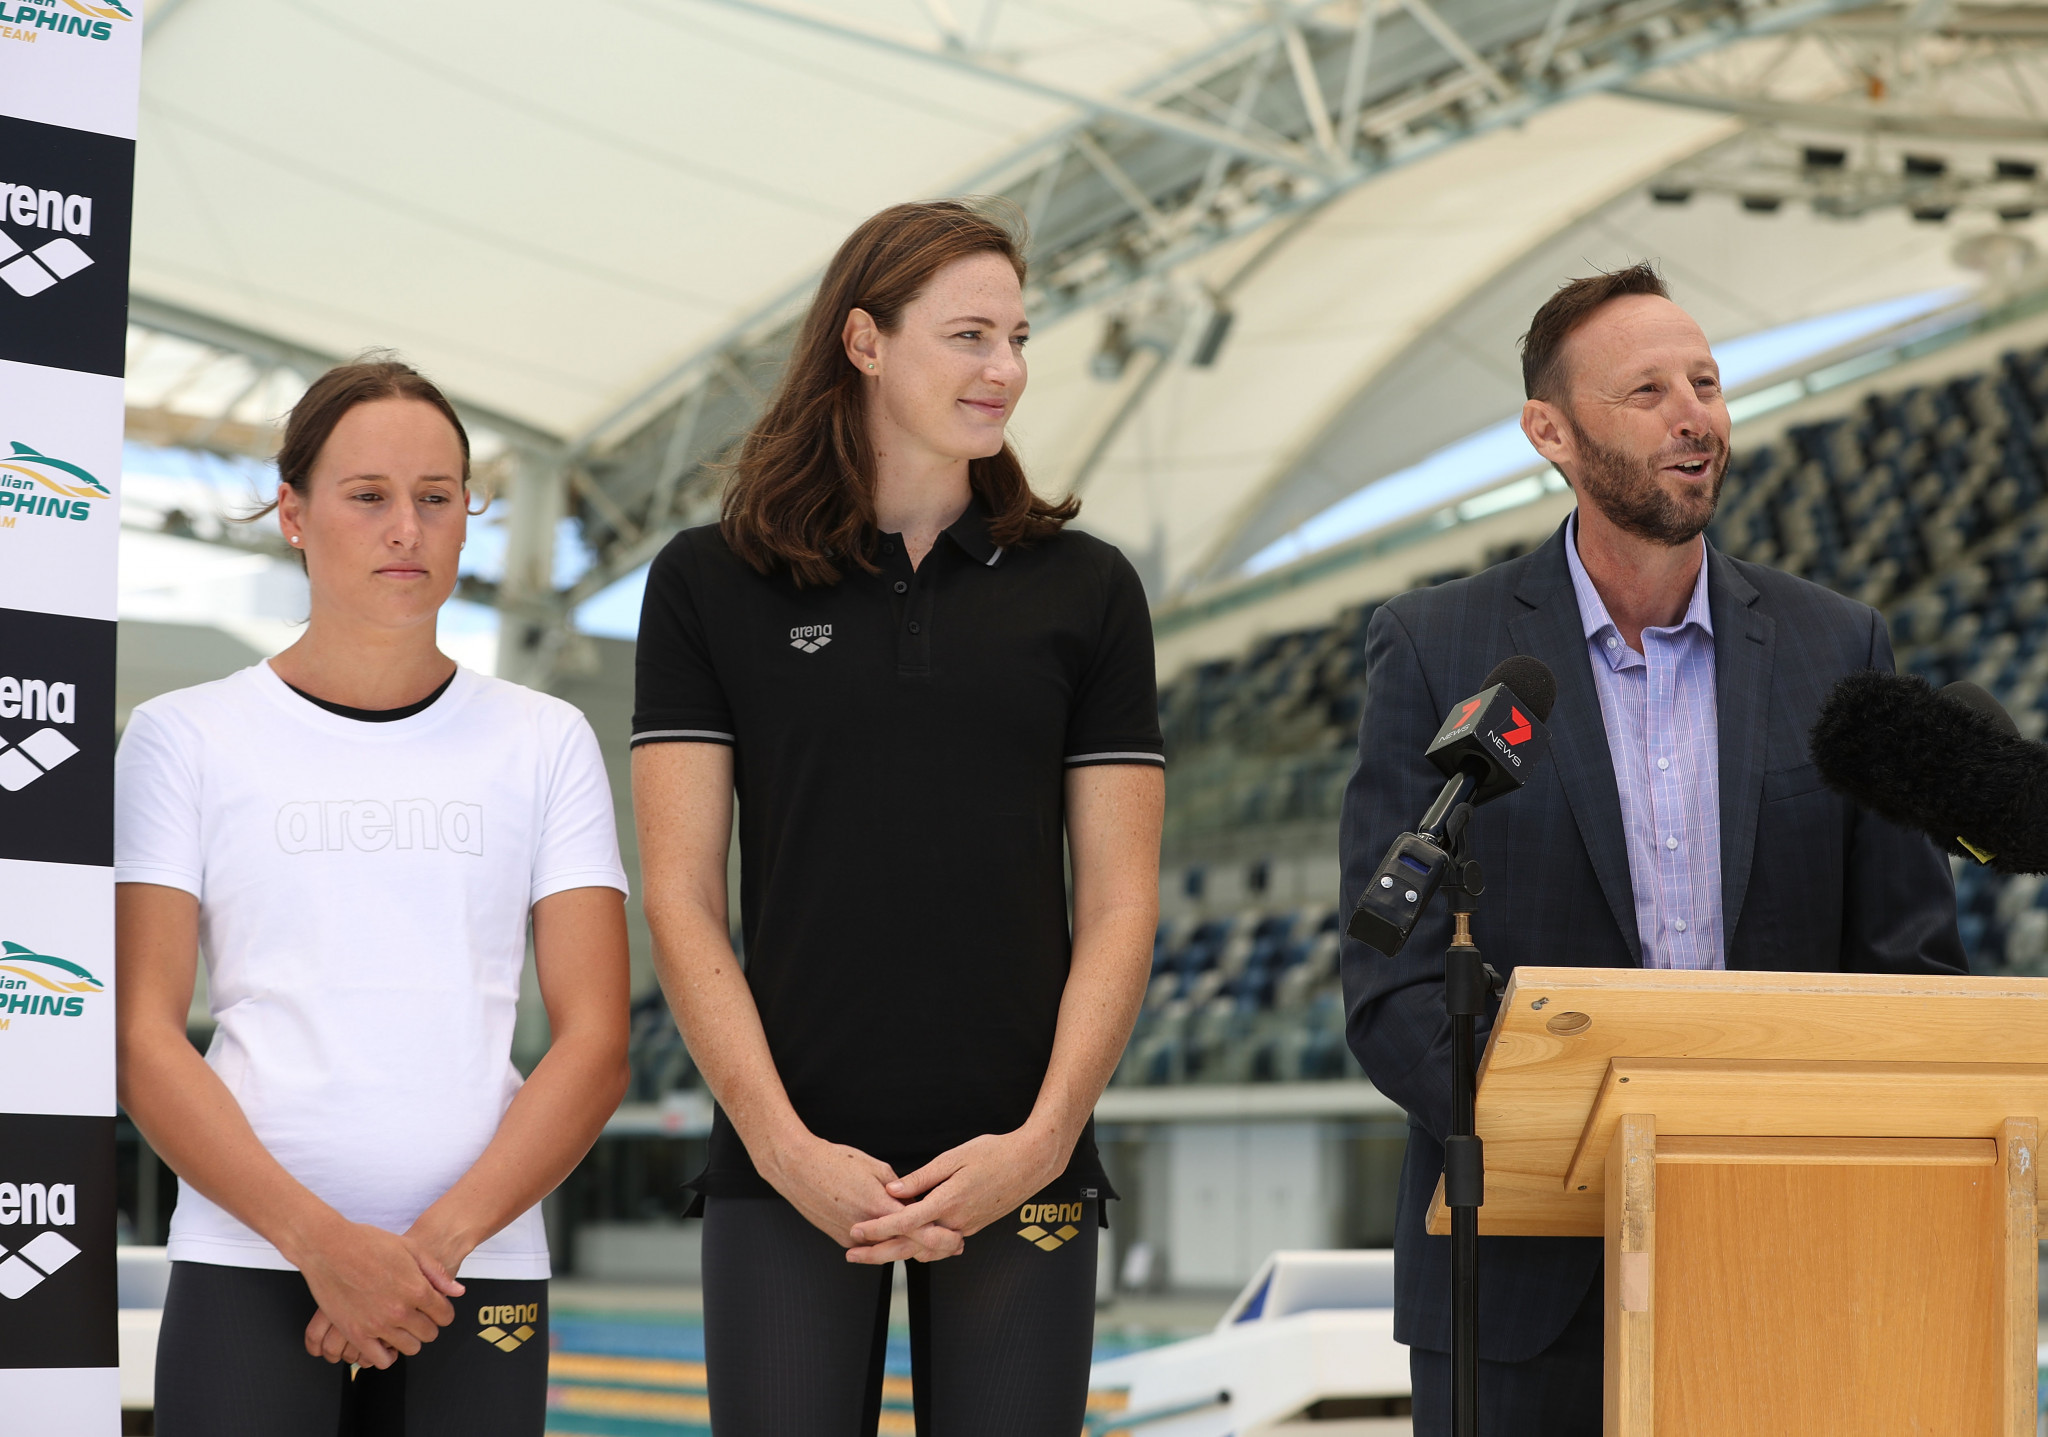 Swimming Australia chief executive Mark Anderson and swimmers Jess Hansen and Cate Campbell announce a Swimming Australia partnership in January 2017 ©Getty Images